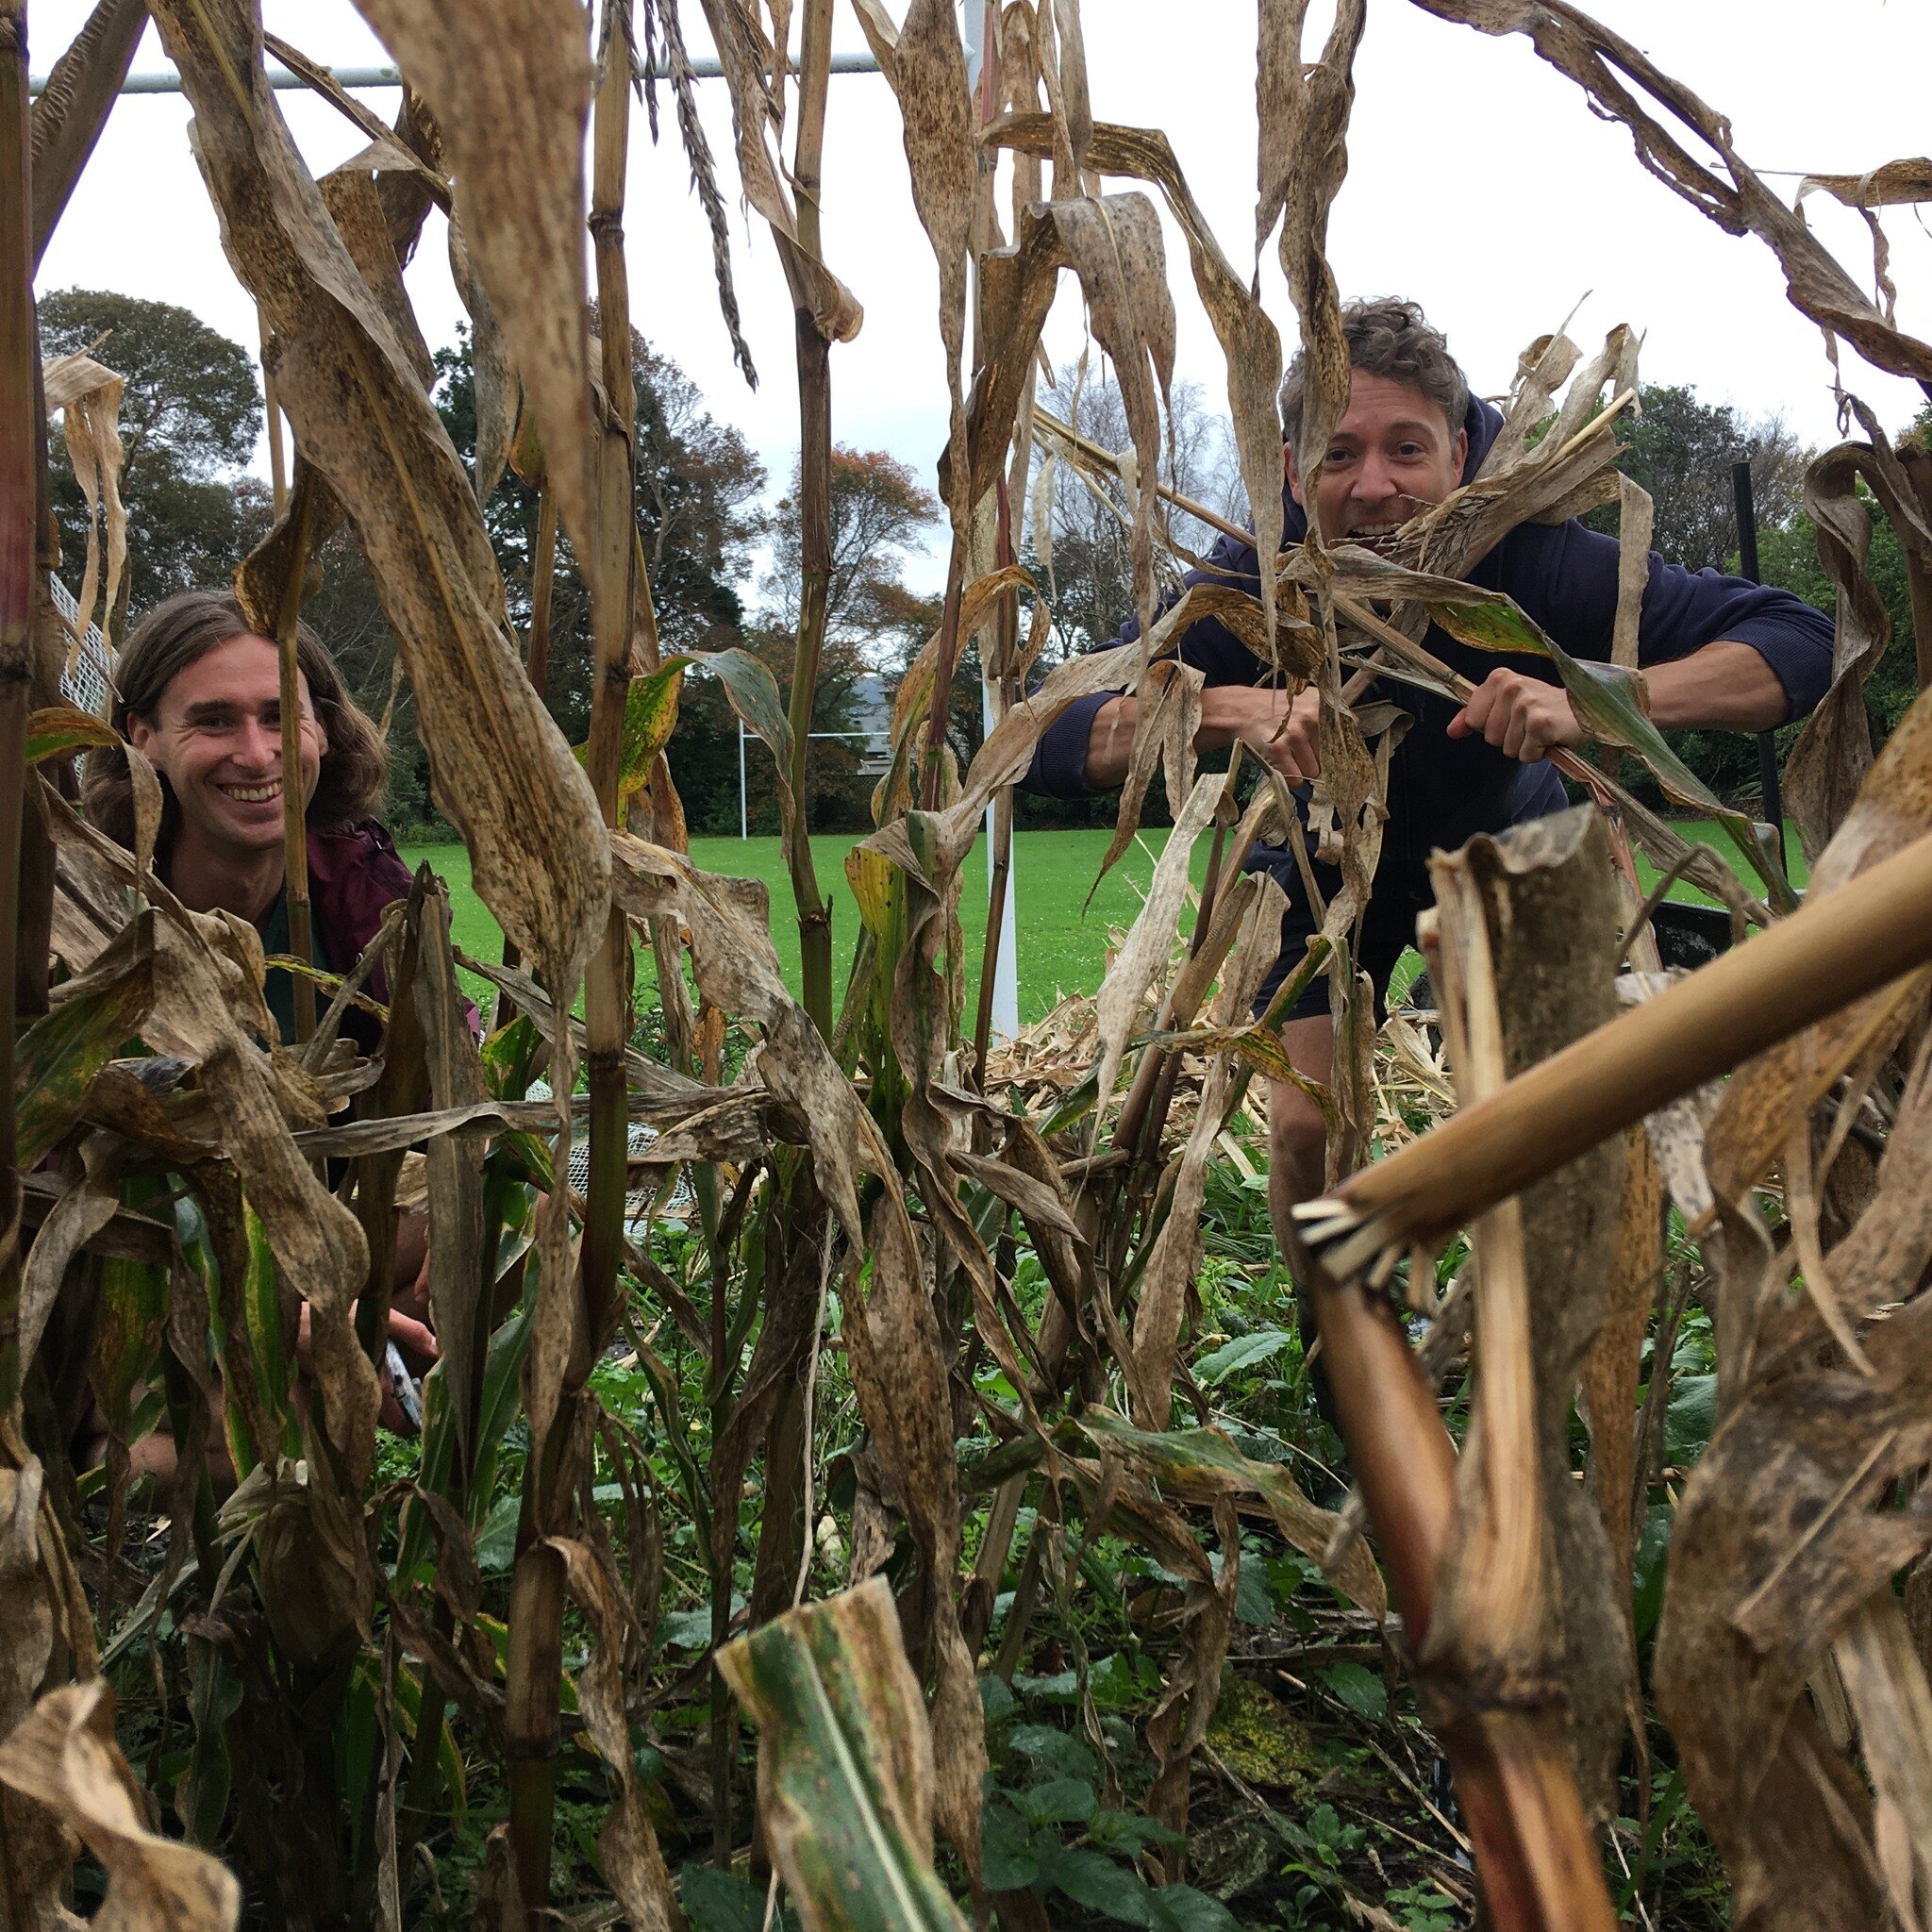 At today's gardening session it was time to say haere rā to the corn! We hope to break down the corn stalks, as well as the sunflower stalks, into chunky mulch to use on the beds and in the compost. Both types of stalks are well dried now and thus ri